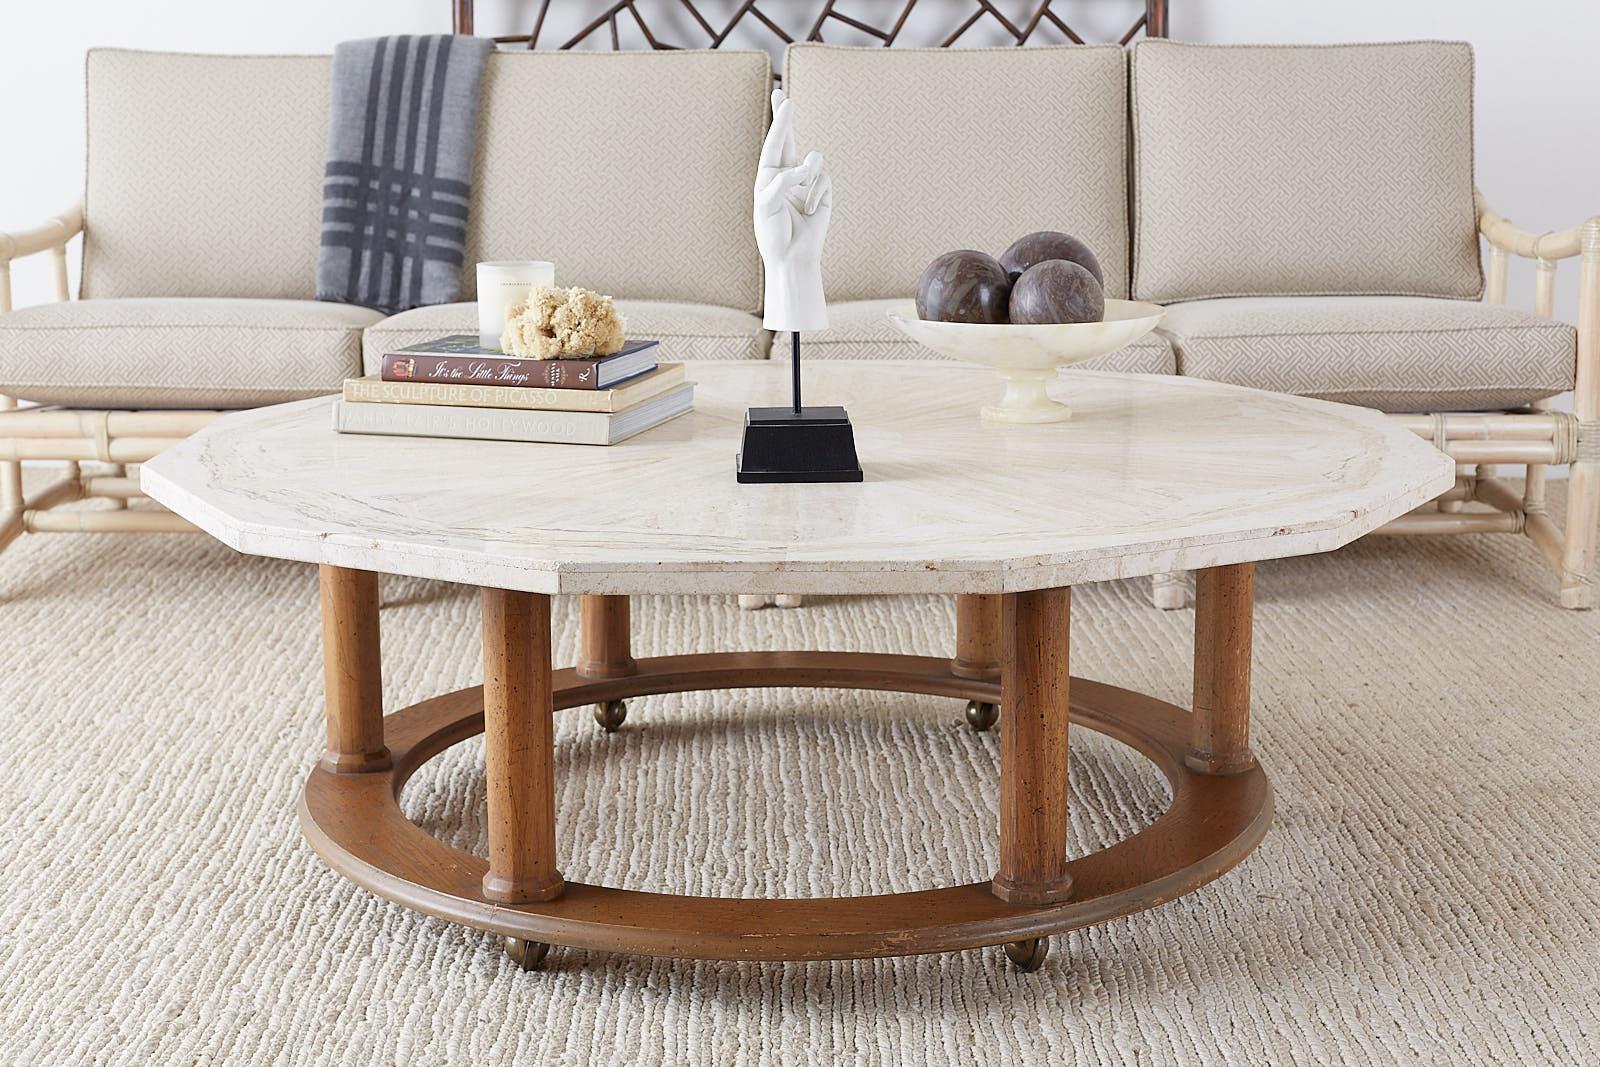 Stylish Mid-Century Modern coffee or cocktail table featuring a travertine top made by Henredon. The stone top has a decagon shape with a faceted edge and a geometric starburst design in the stone. Supported by an octagonal base with neoclassical